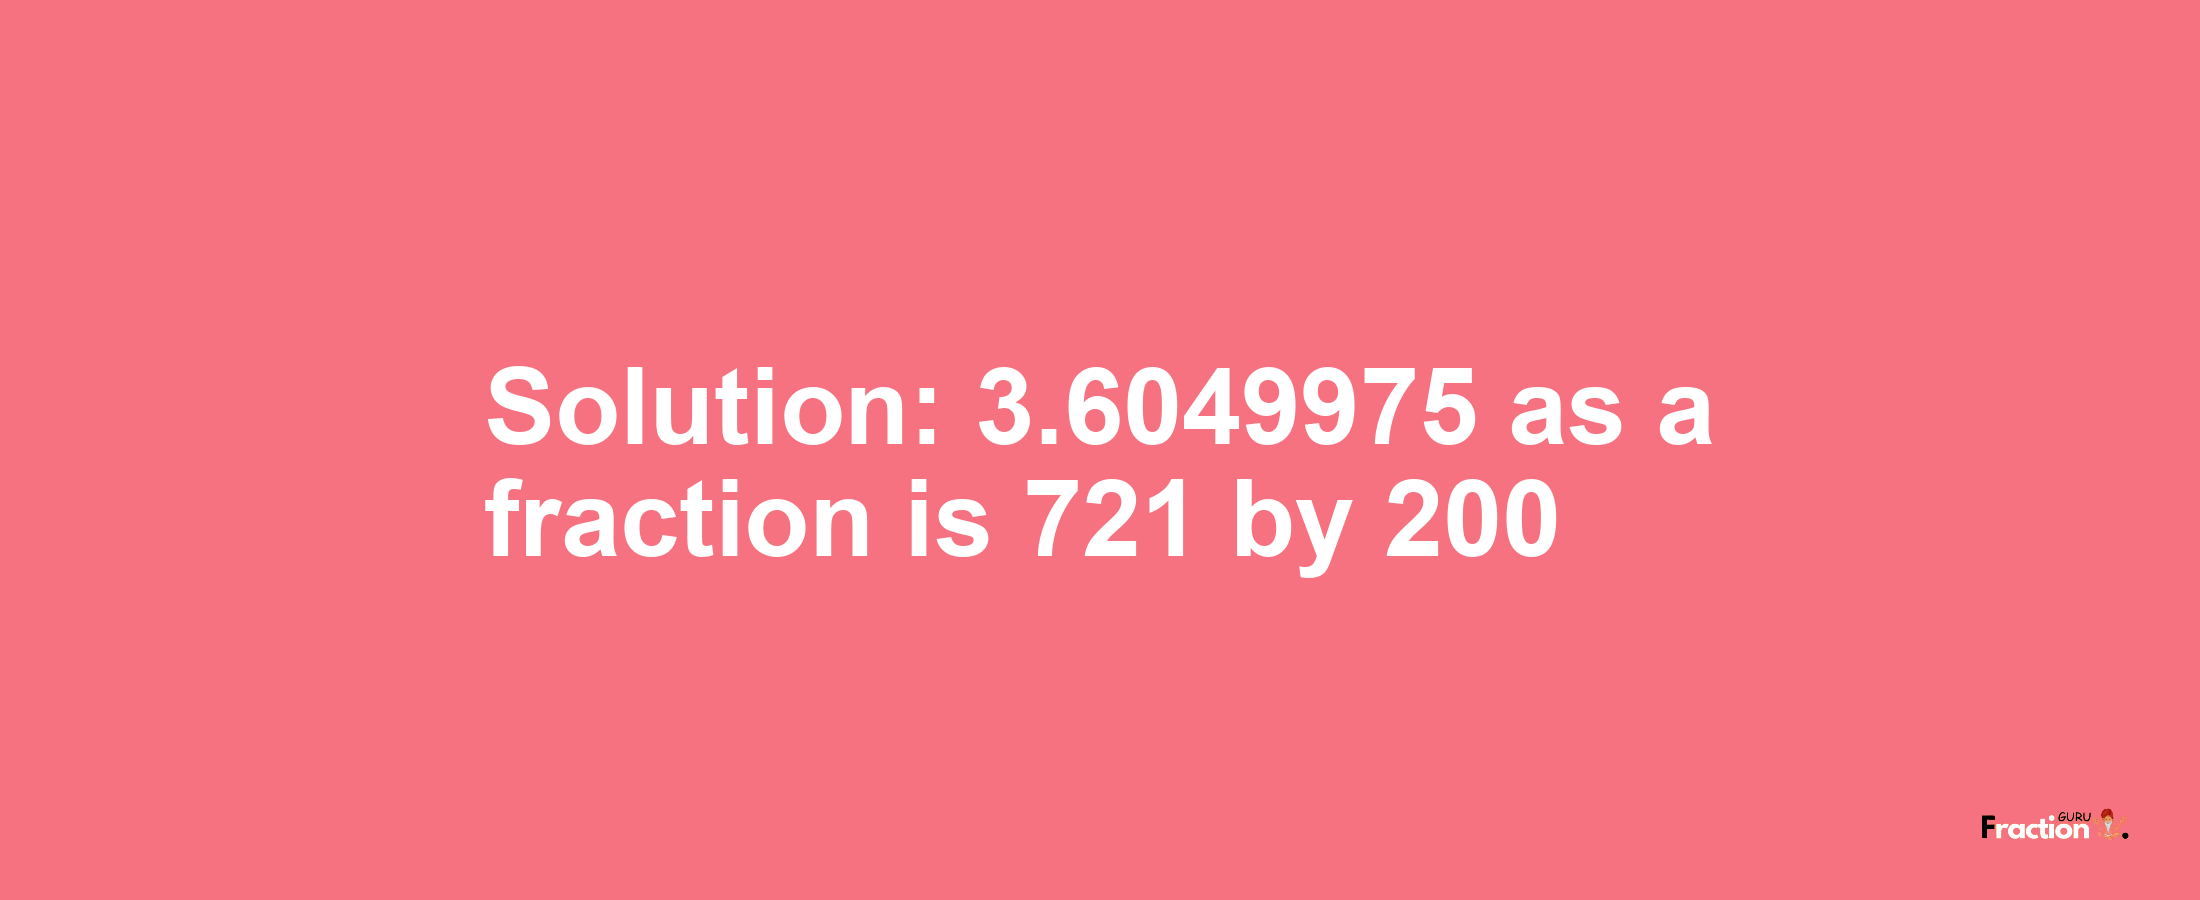 Solution:3.6049975 as a fraction is 721/200